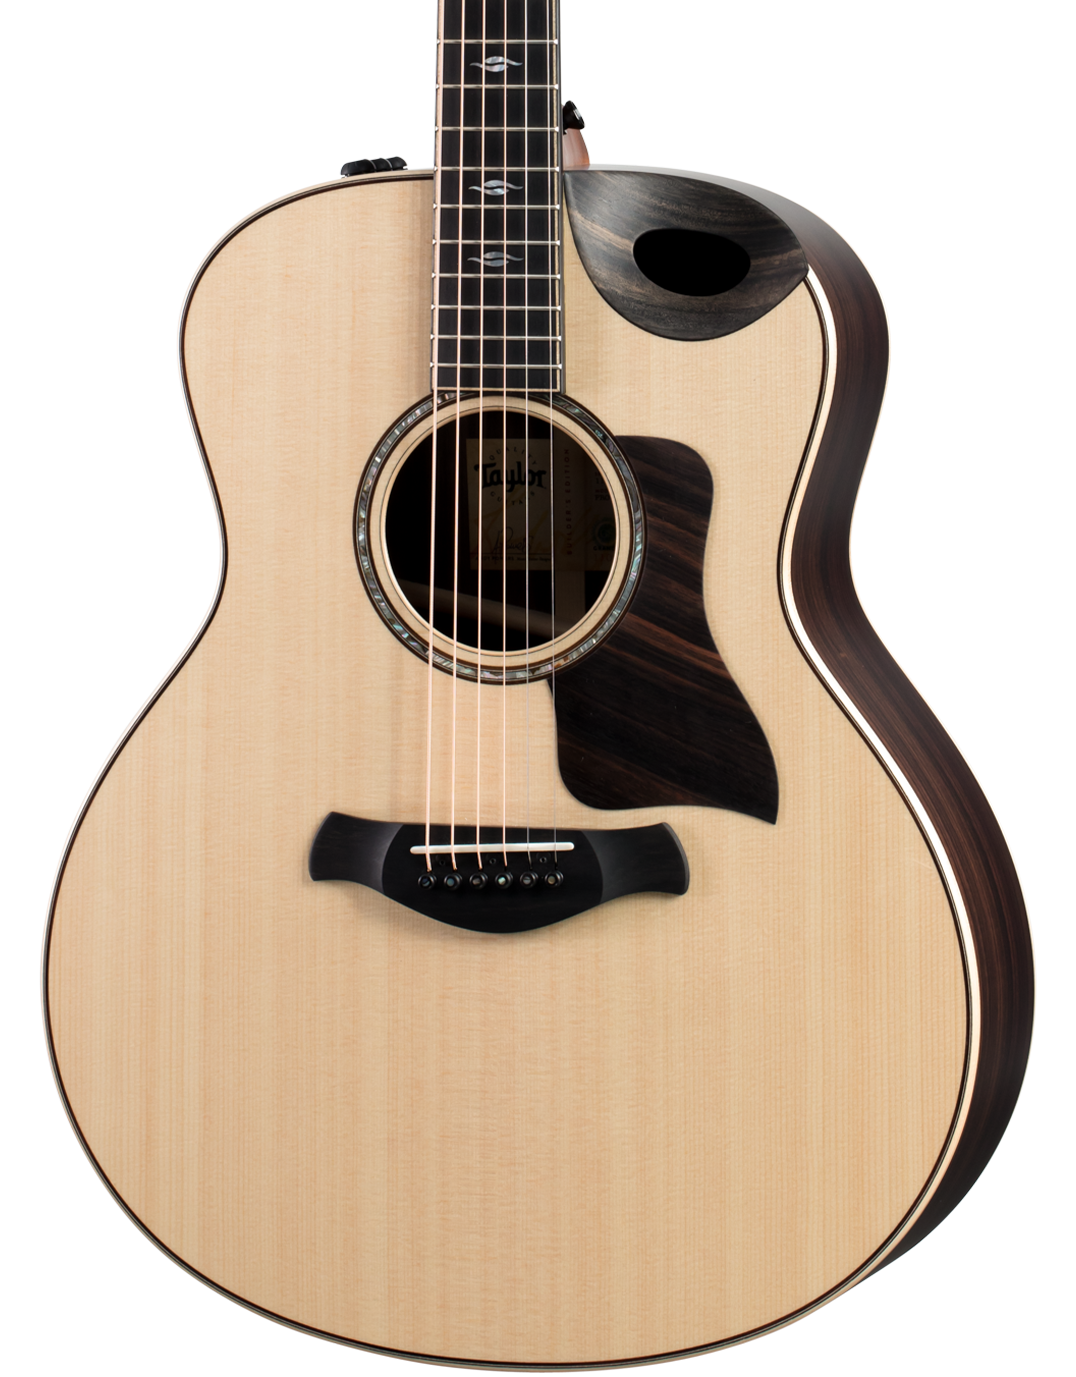 taylor-features-top-woods-lutz-spruce-BE-816ce